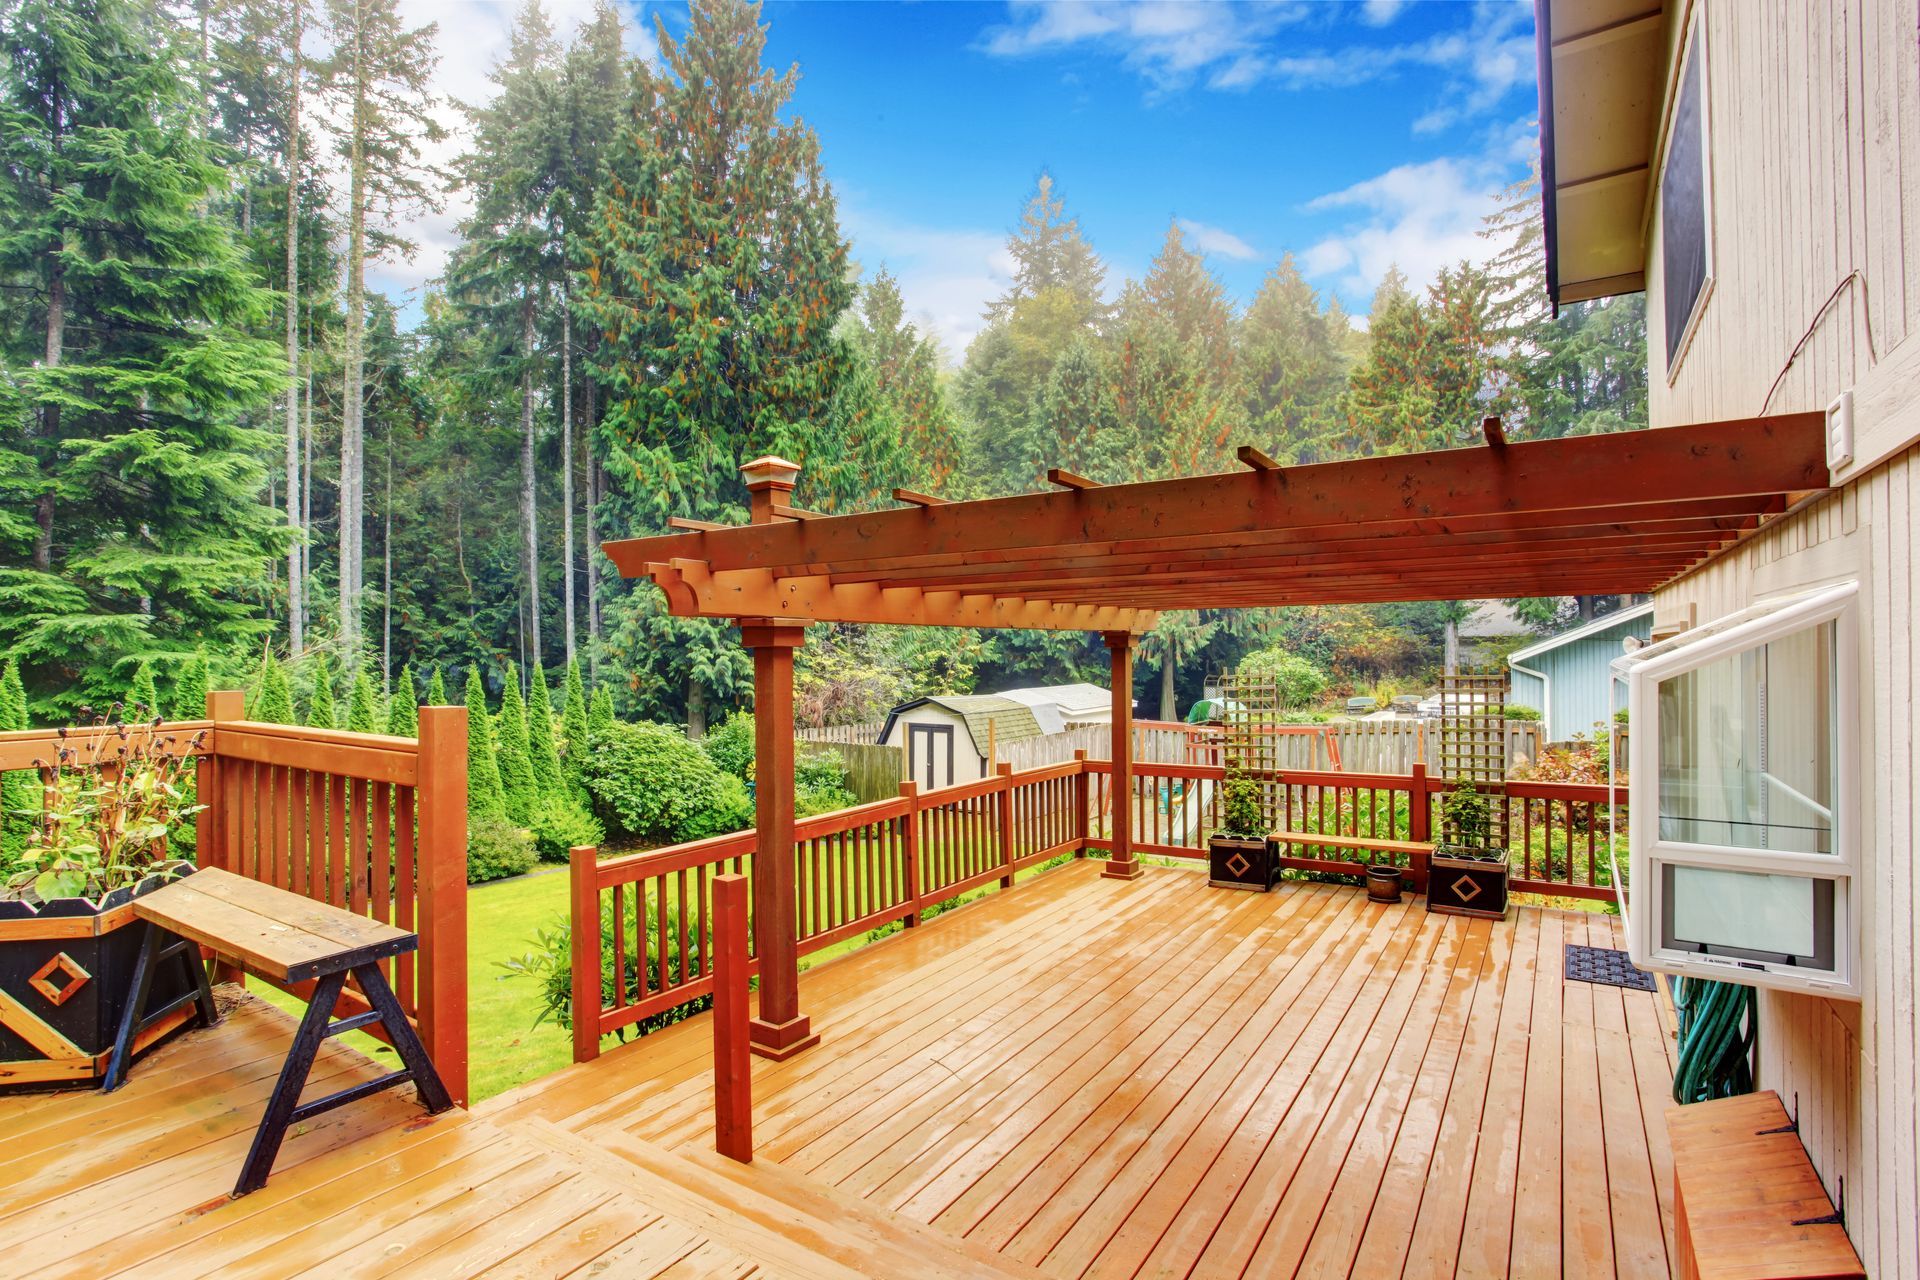 An outdoor walkout deck featuring a beautifully stained wooden surface.